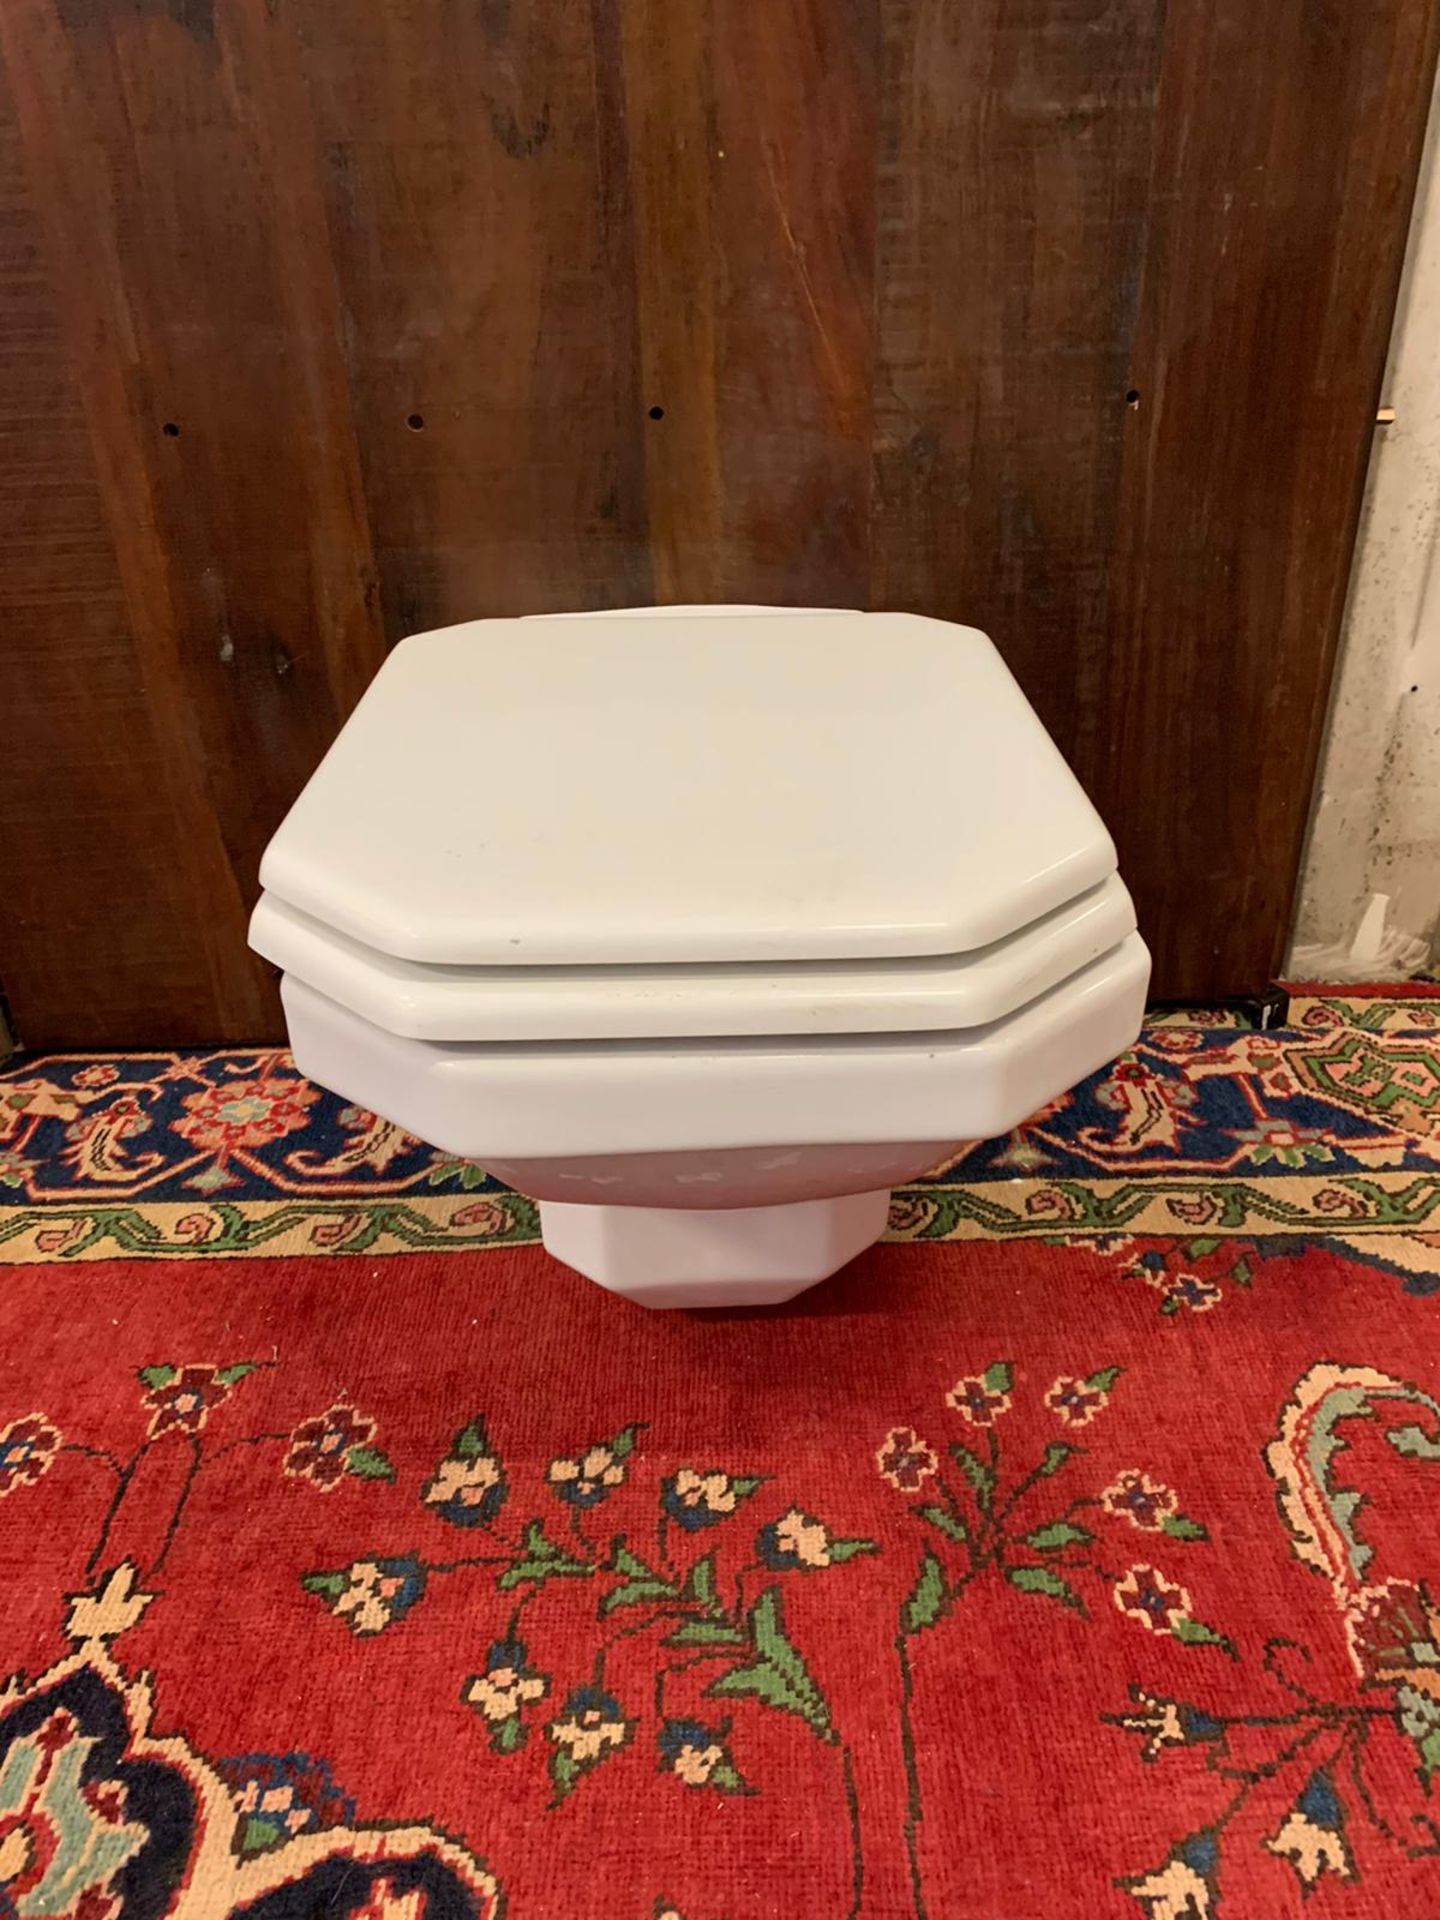 Villeroy & Boch WC Pan Basin 58cm X 38cm X 46cm Consigned From A Luxury Mayfair Residence From A